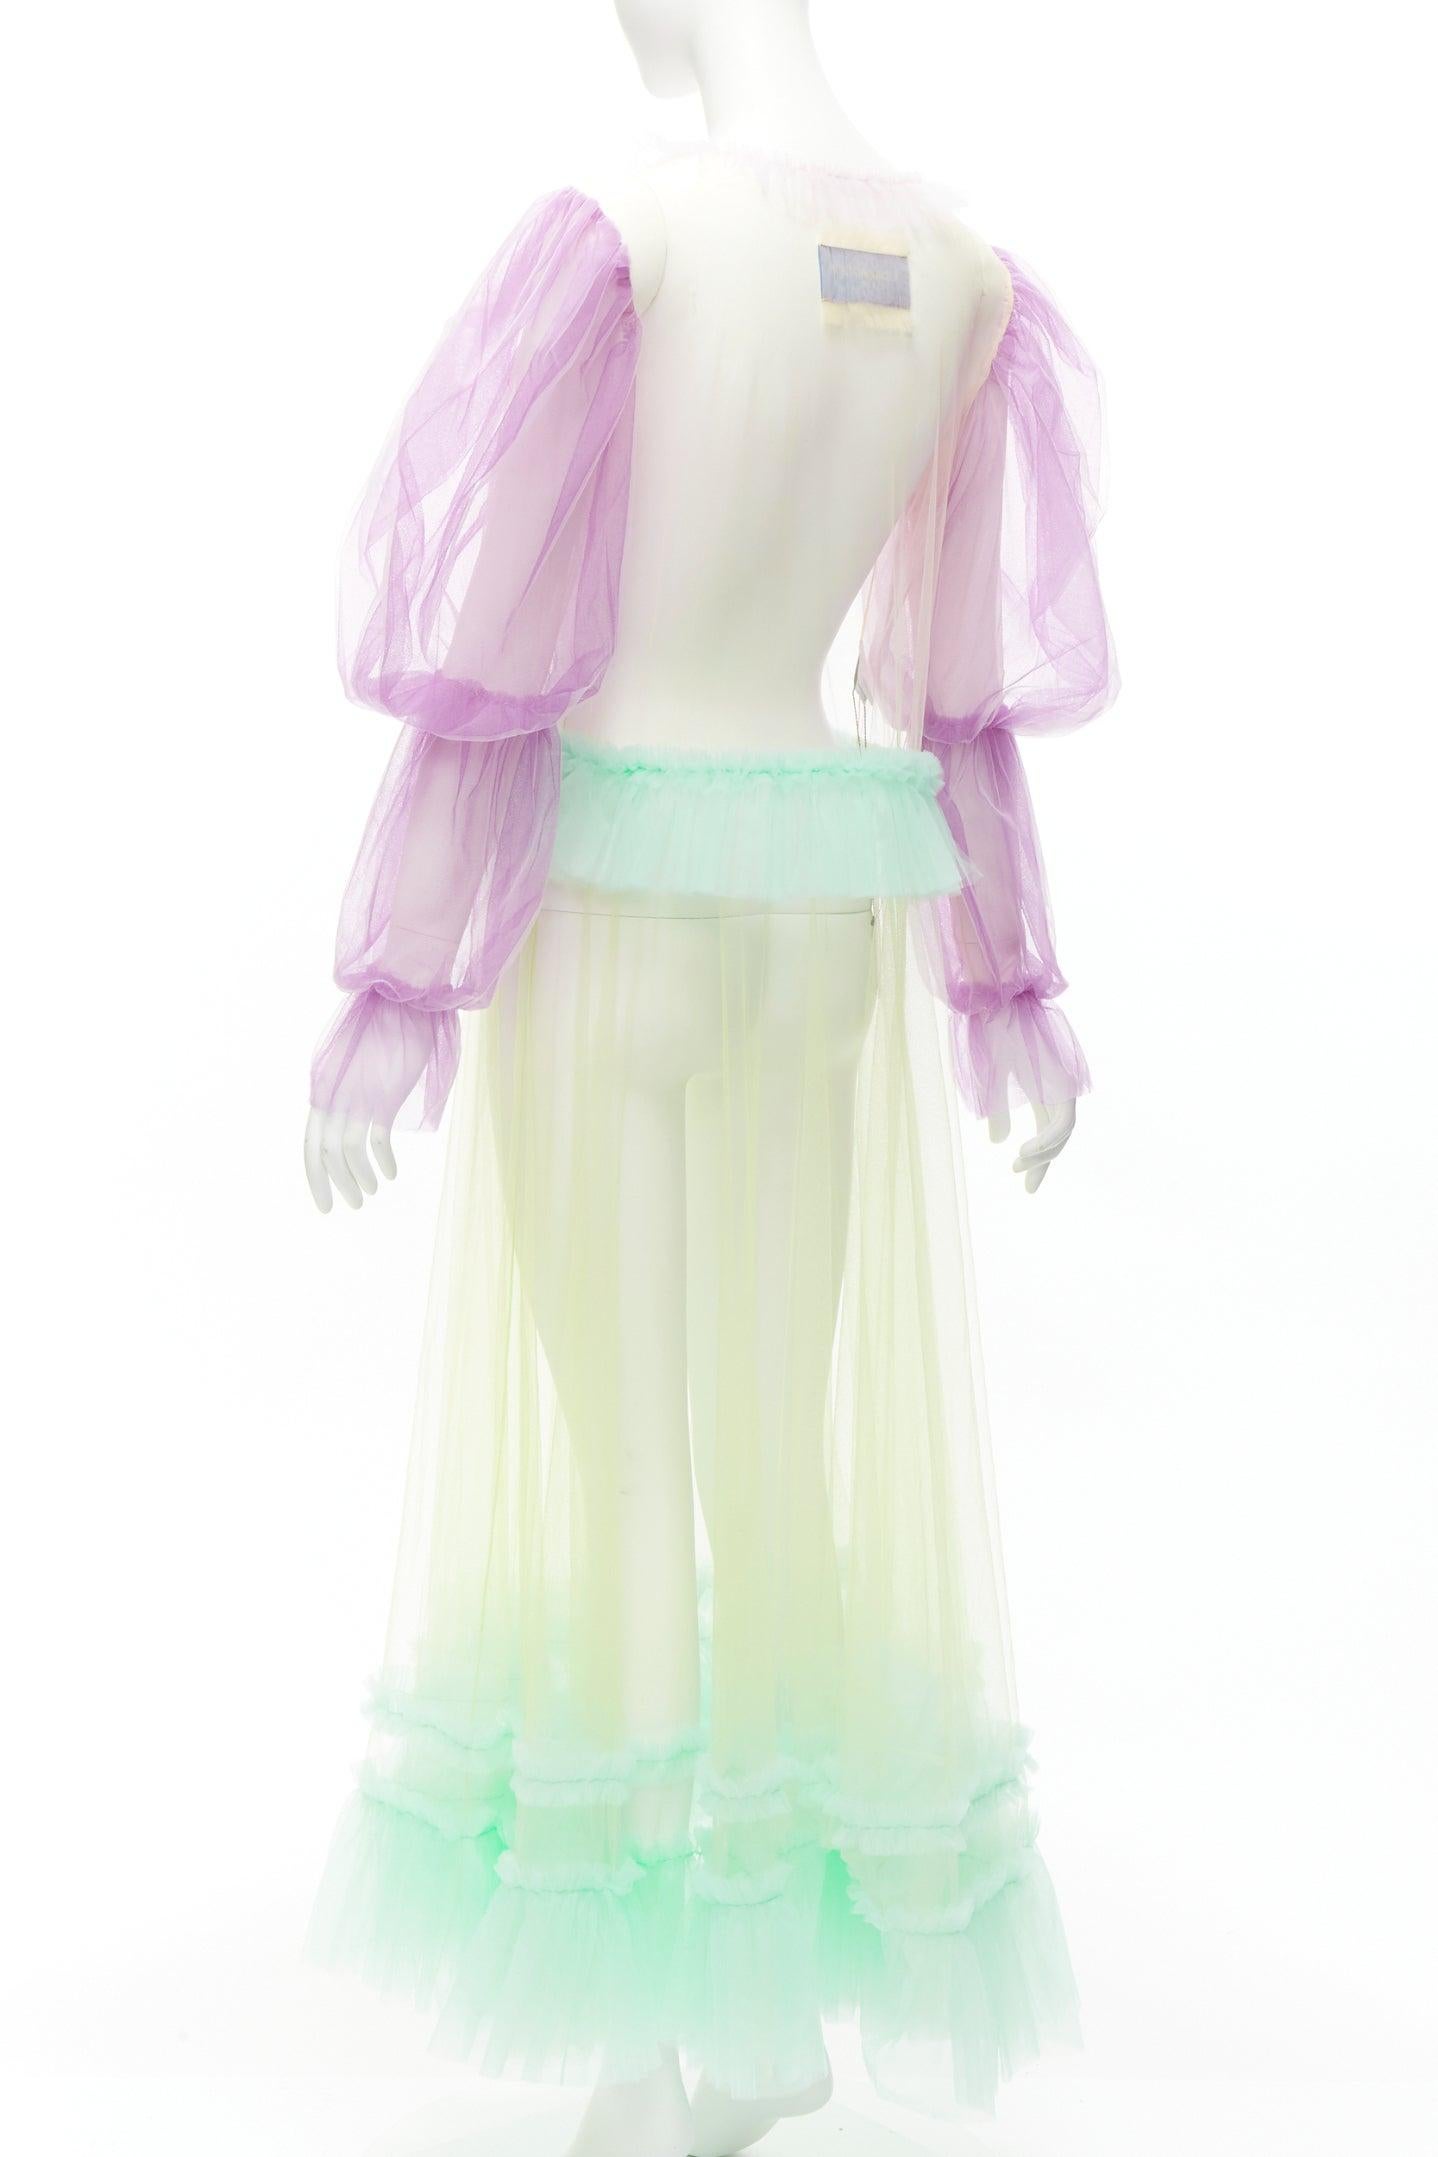 Women's VIKTOR ROLF 2019 TULLE No Photos Please ruffle pastel puff sleeves sheer dress M For Sale